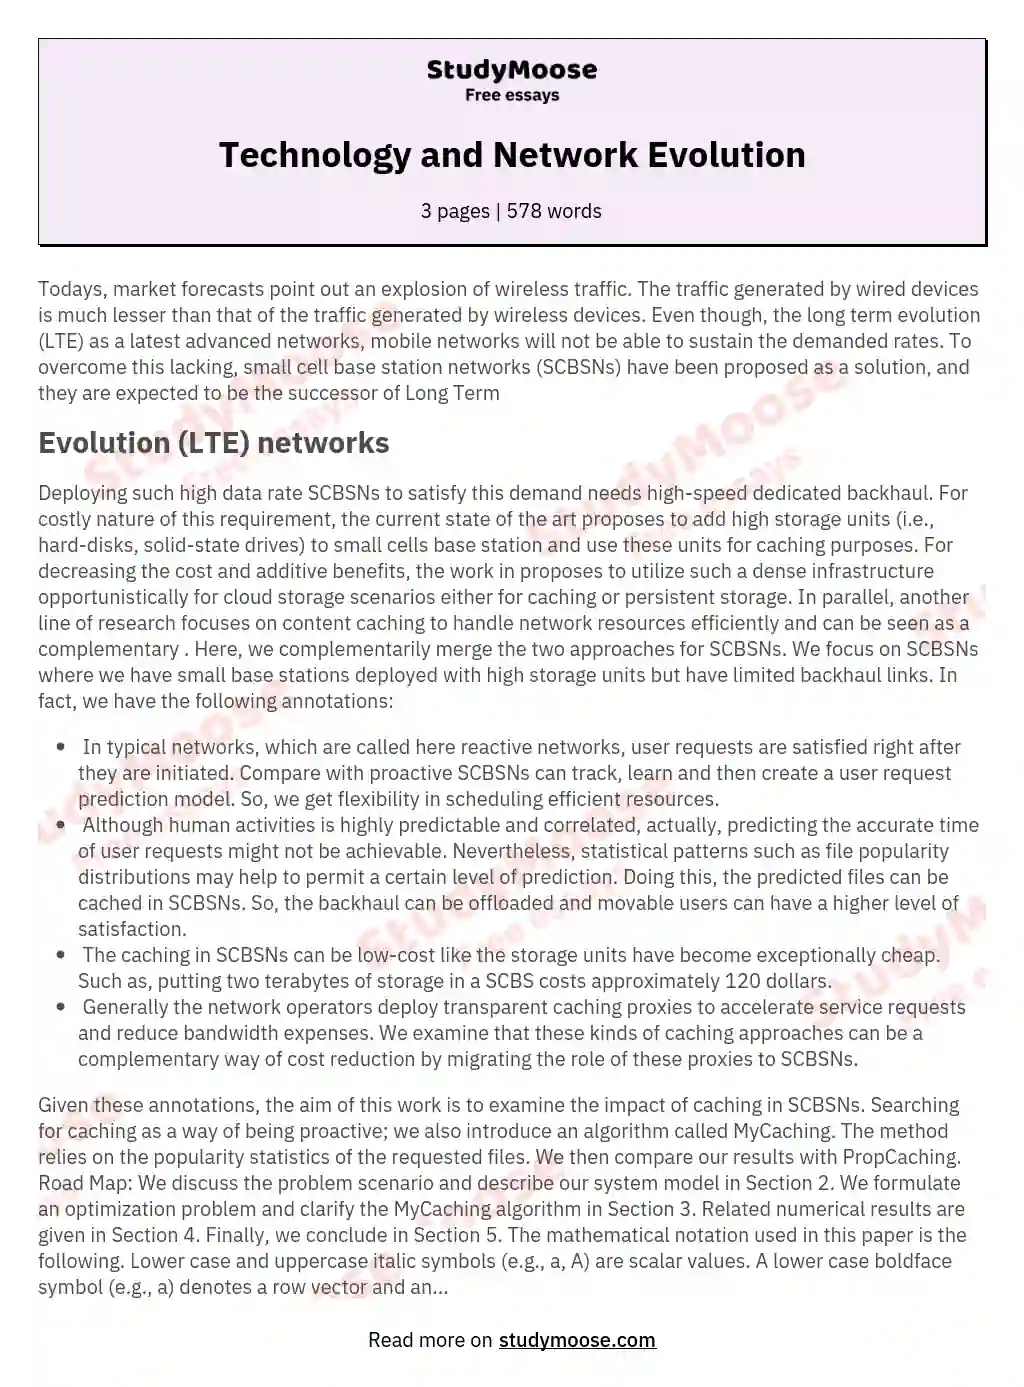 Technology and Network Evolution essay